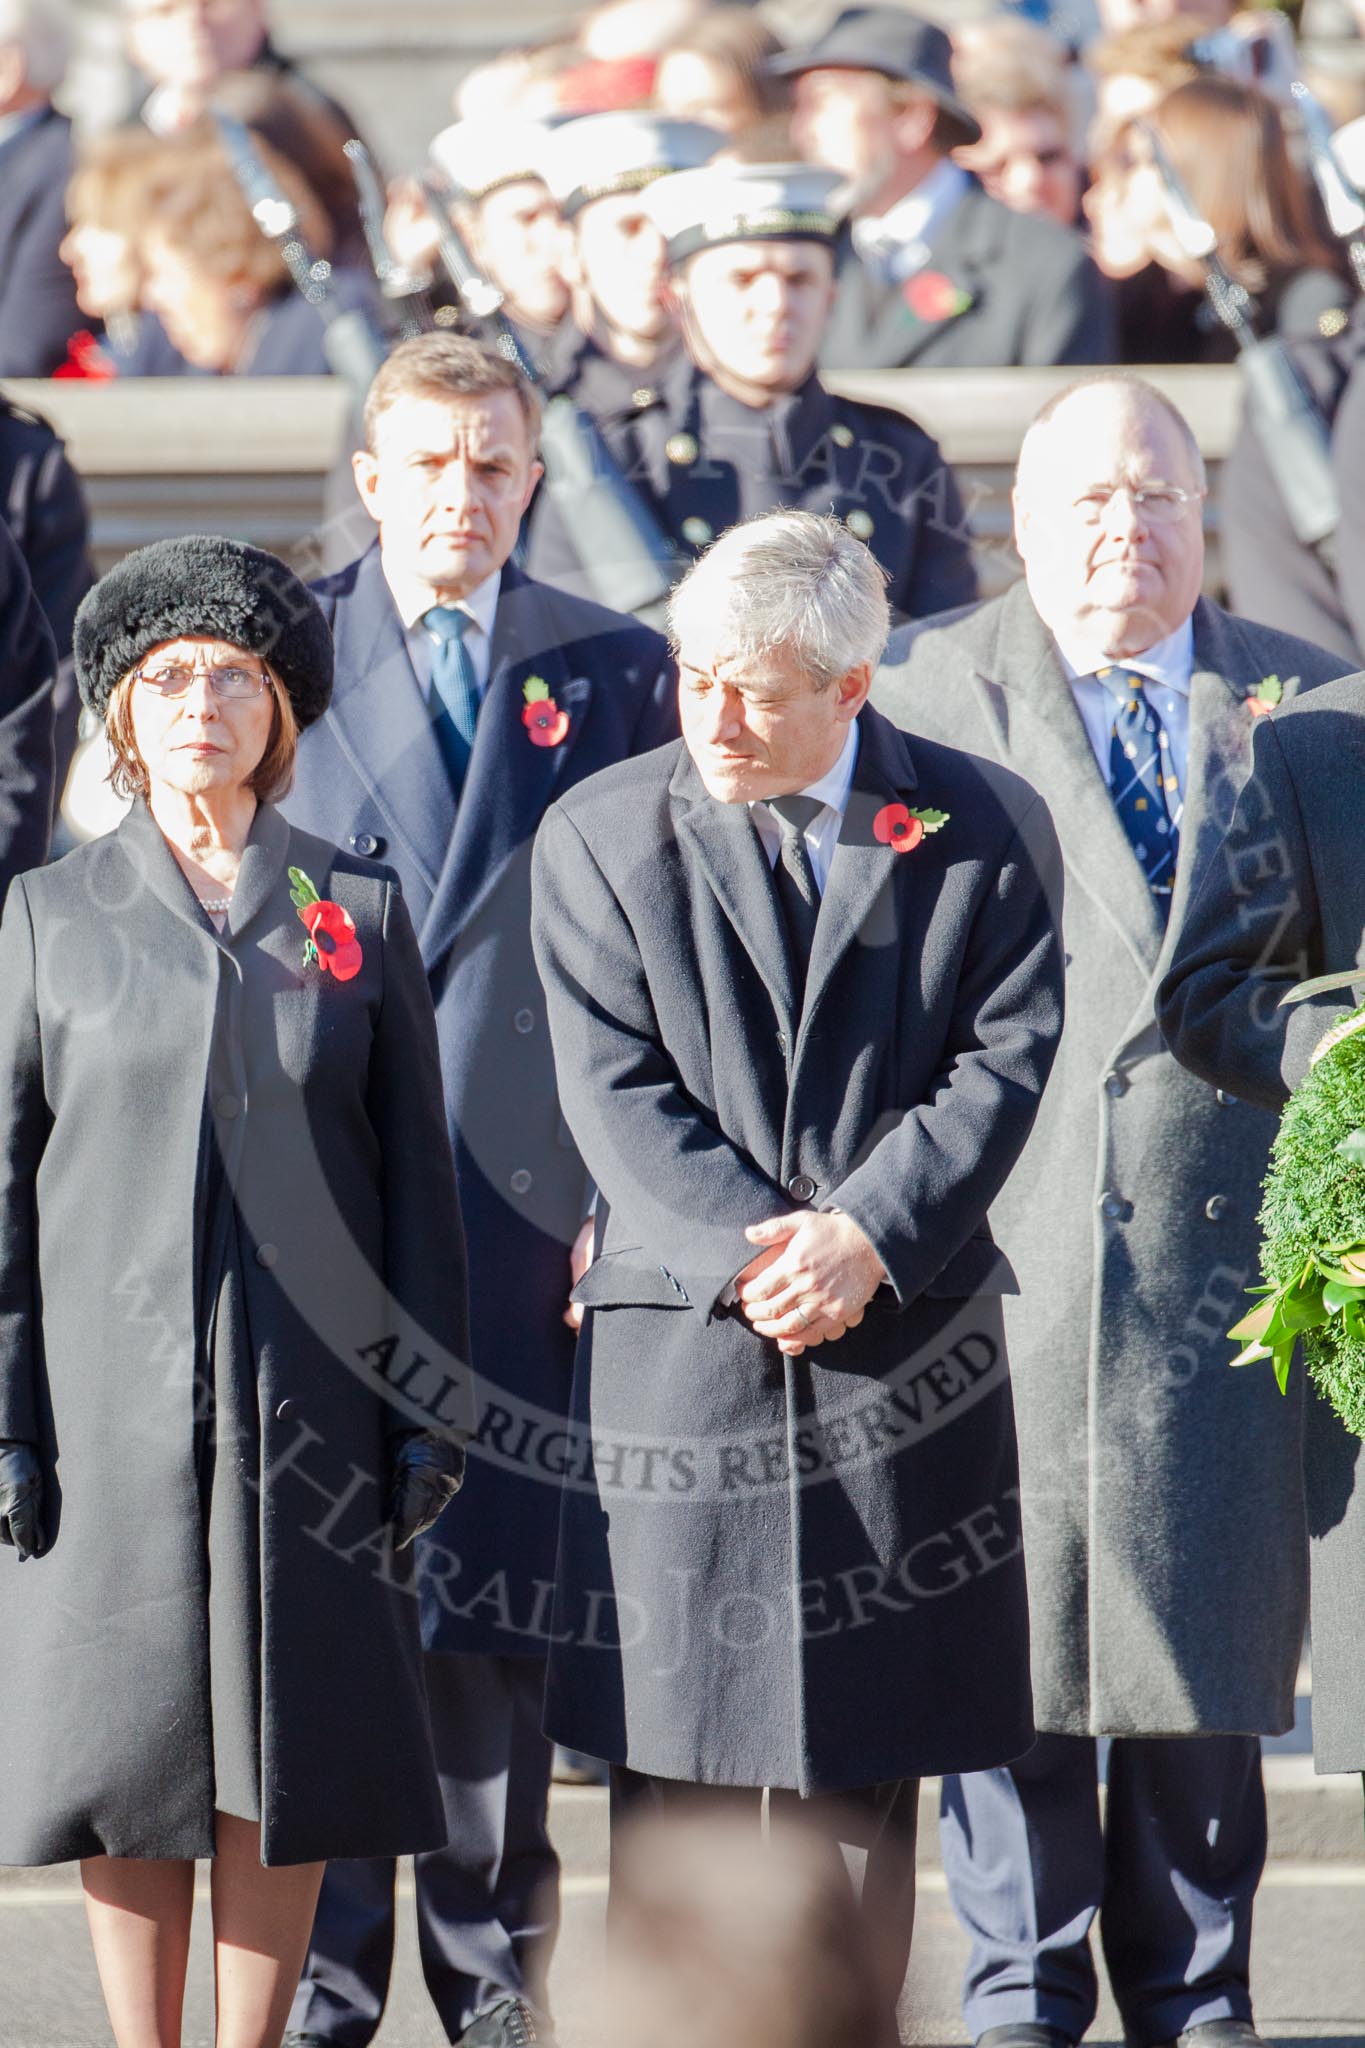 John Bercow, the Speaker of the House of Commons, and Baroness Hayman, Lord Speaker.